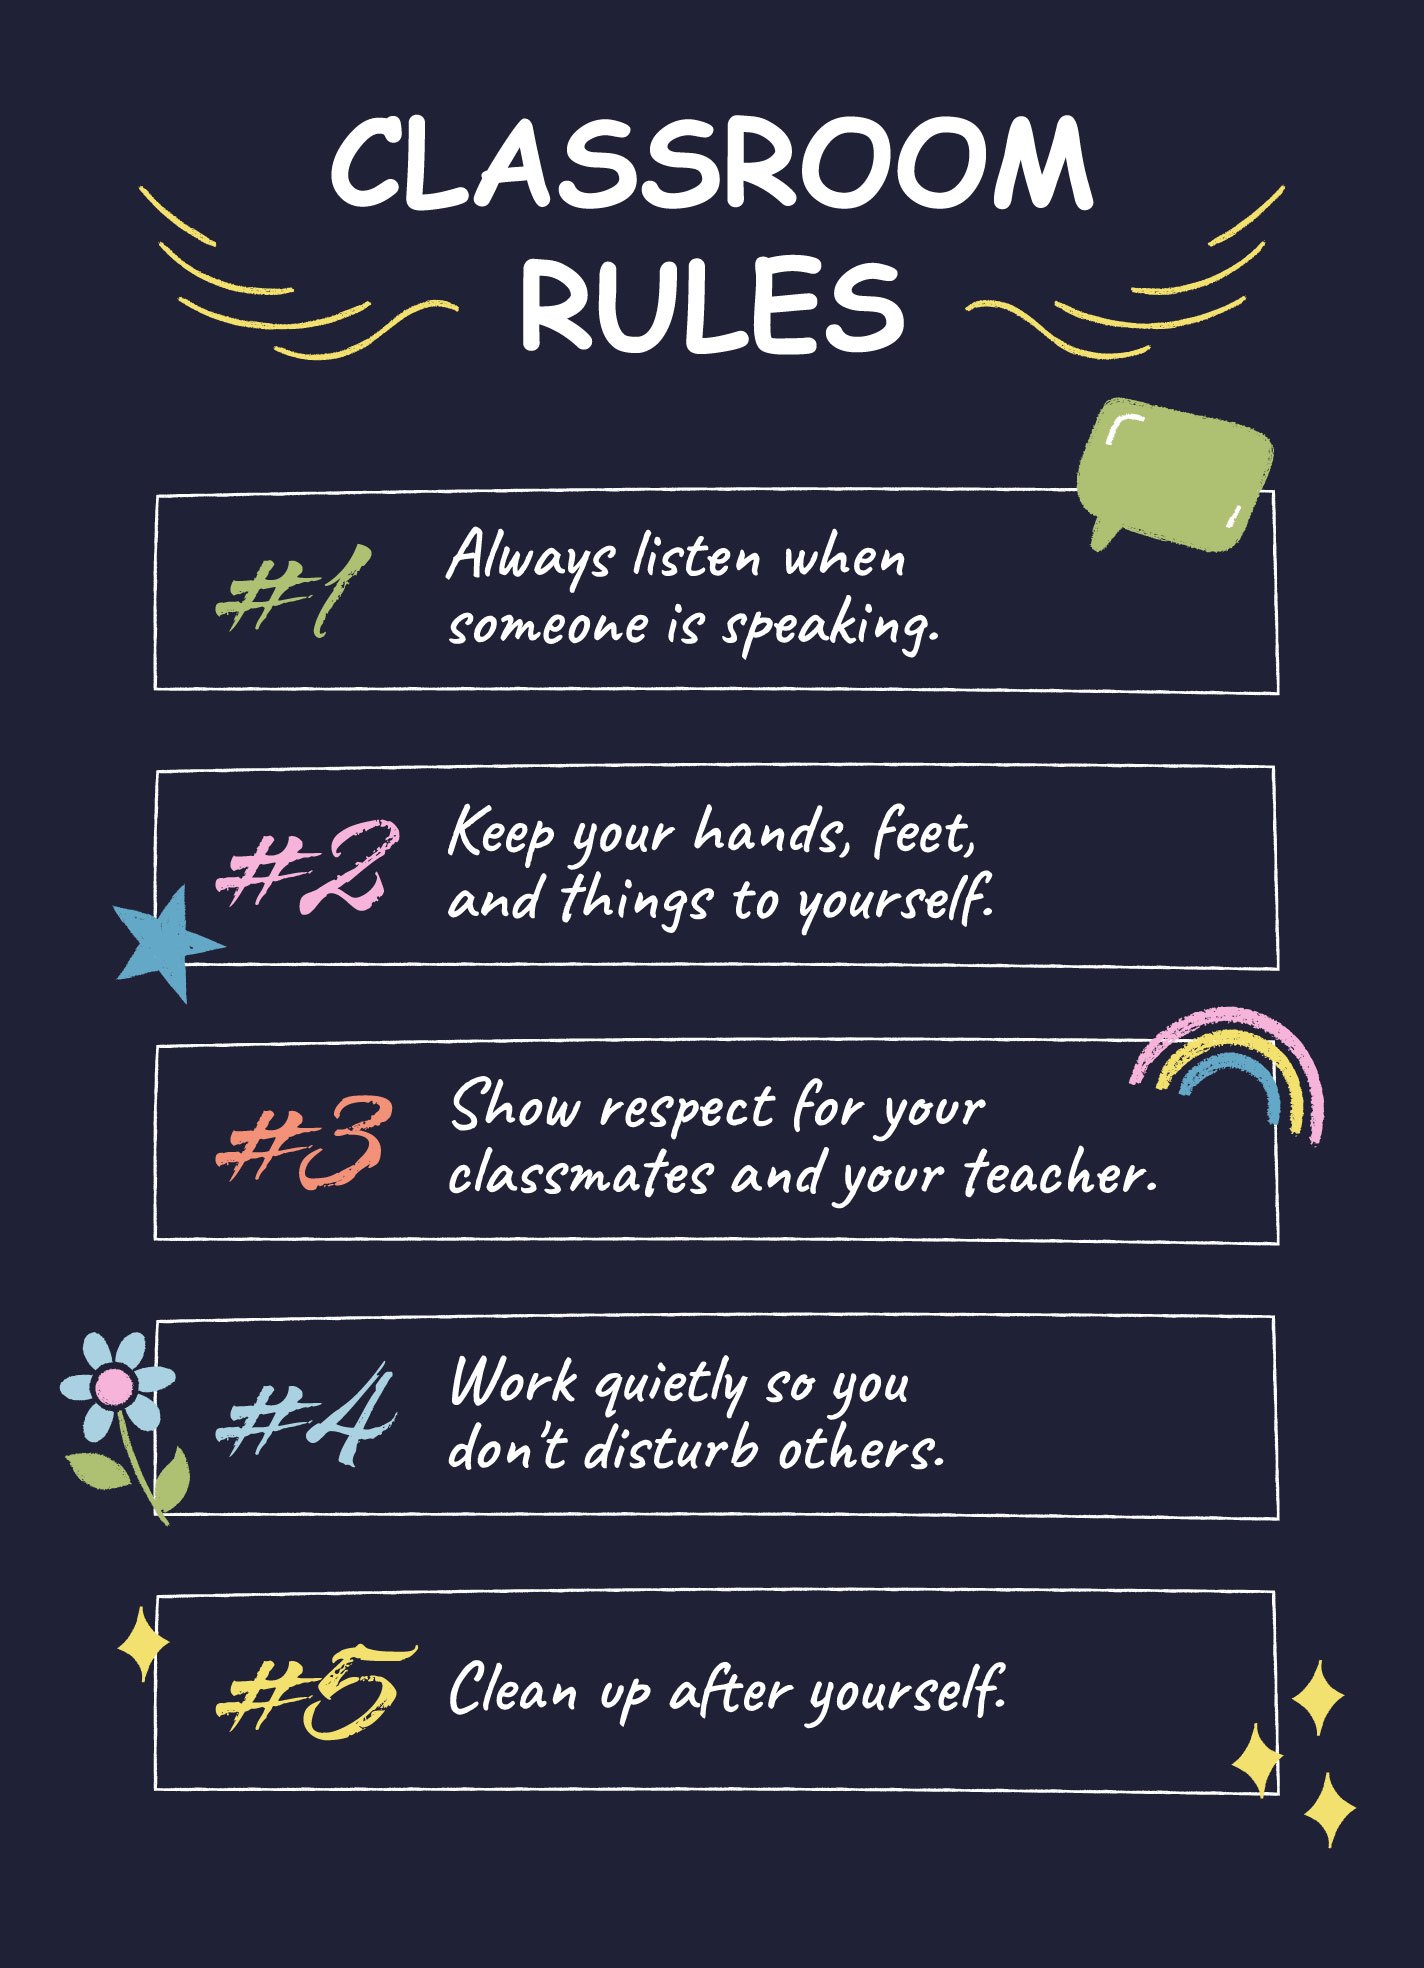 school rules poster templates